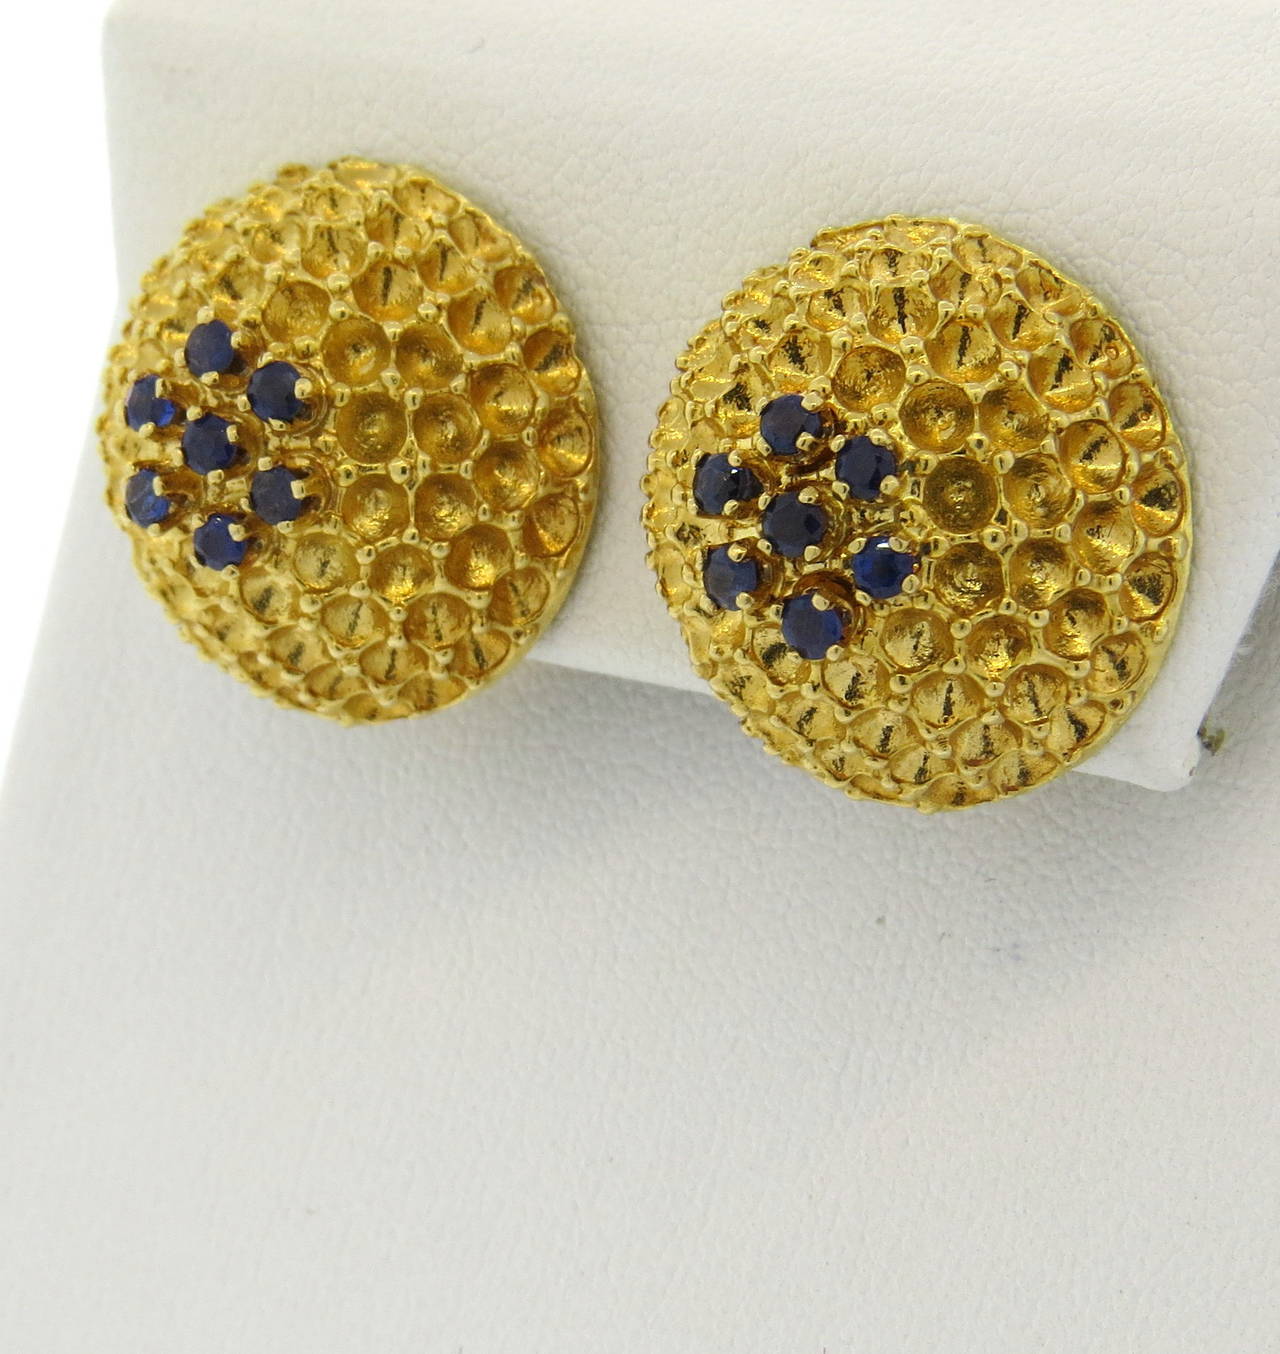 A pair of 18k yellow gold earrings set with sapphires.  Crafted in the 1970s, the earrings measure 20.3mm in diameter and weigh 18.7 grams